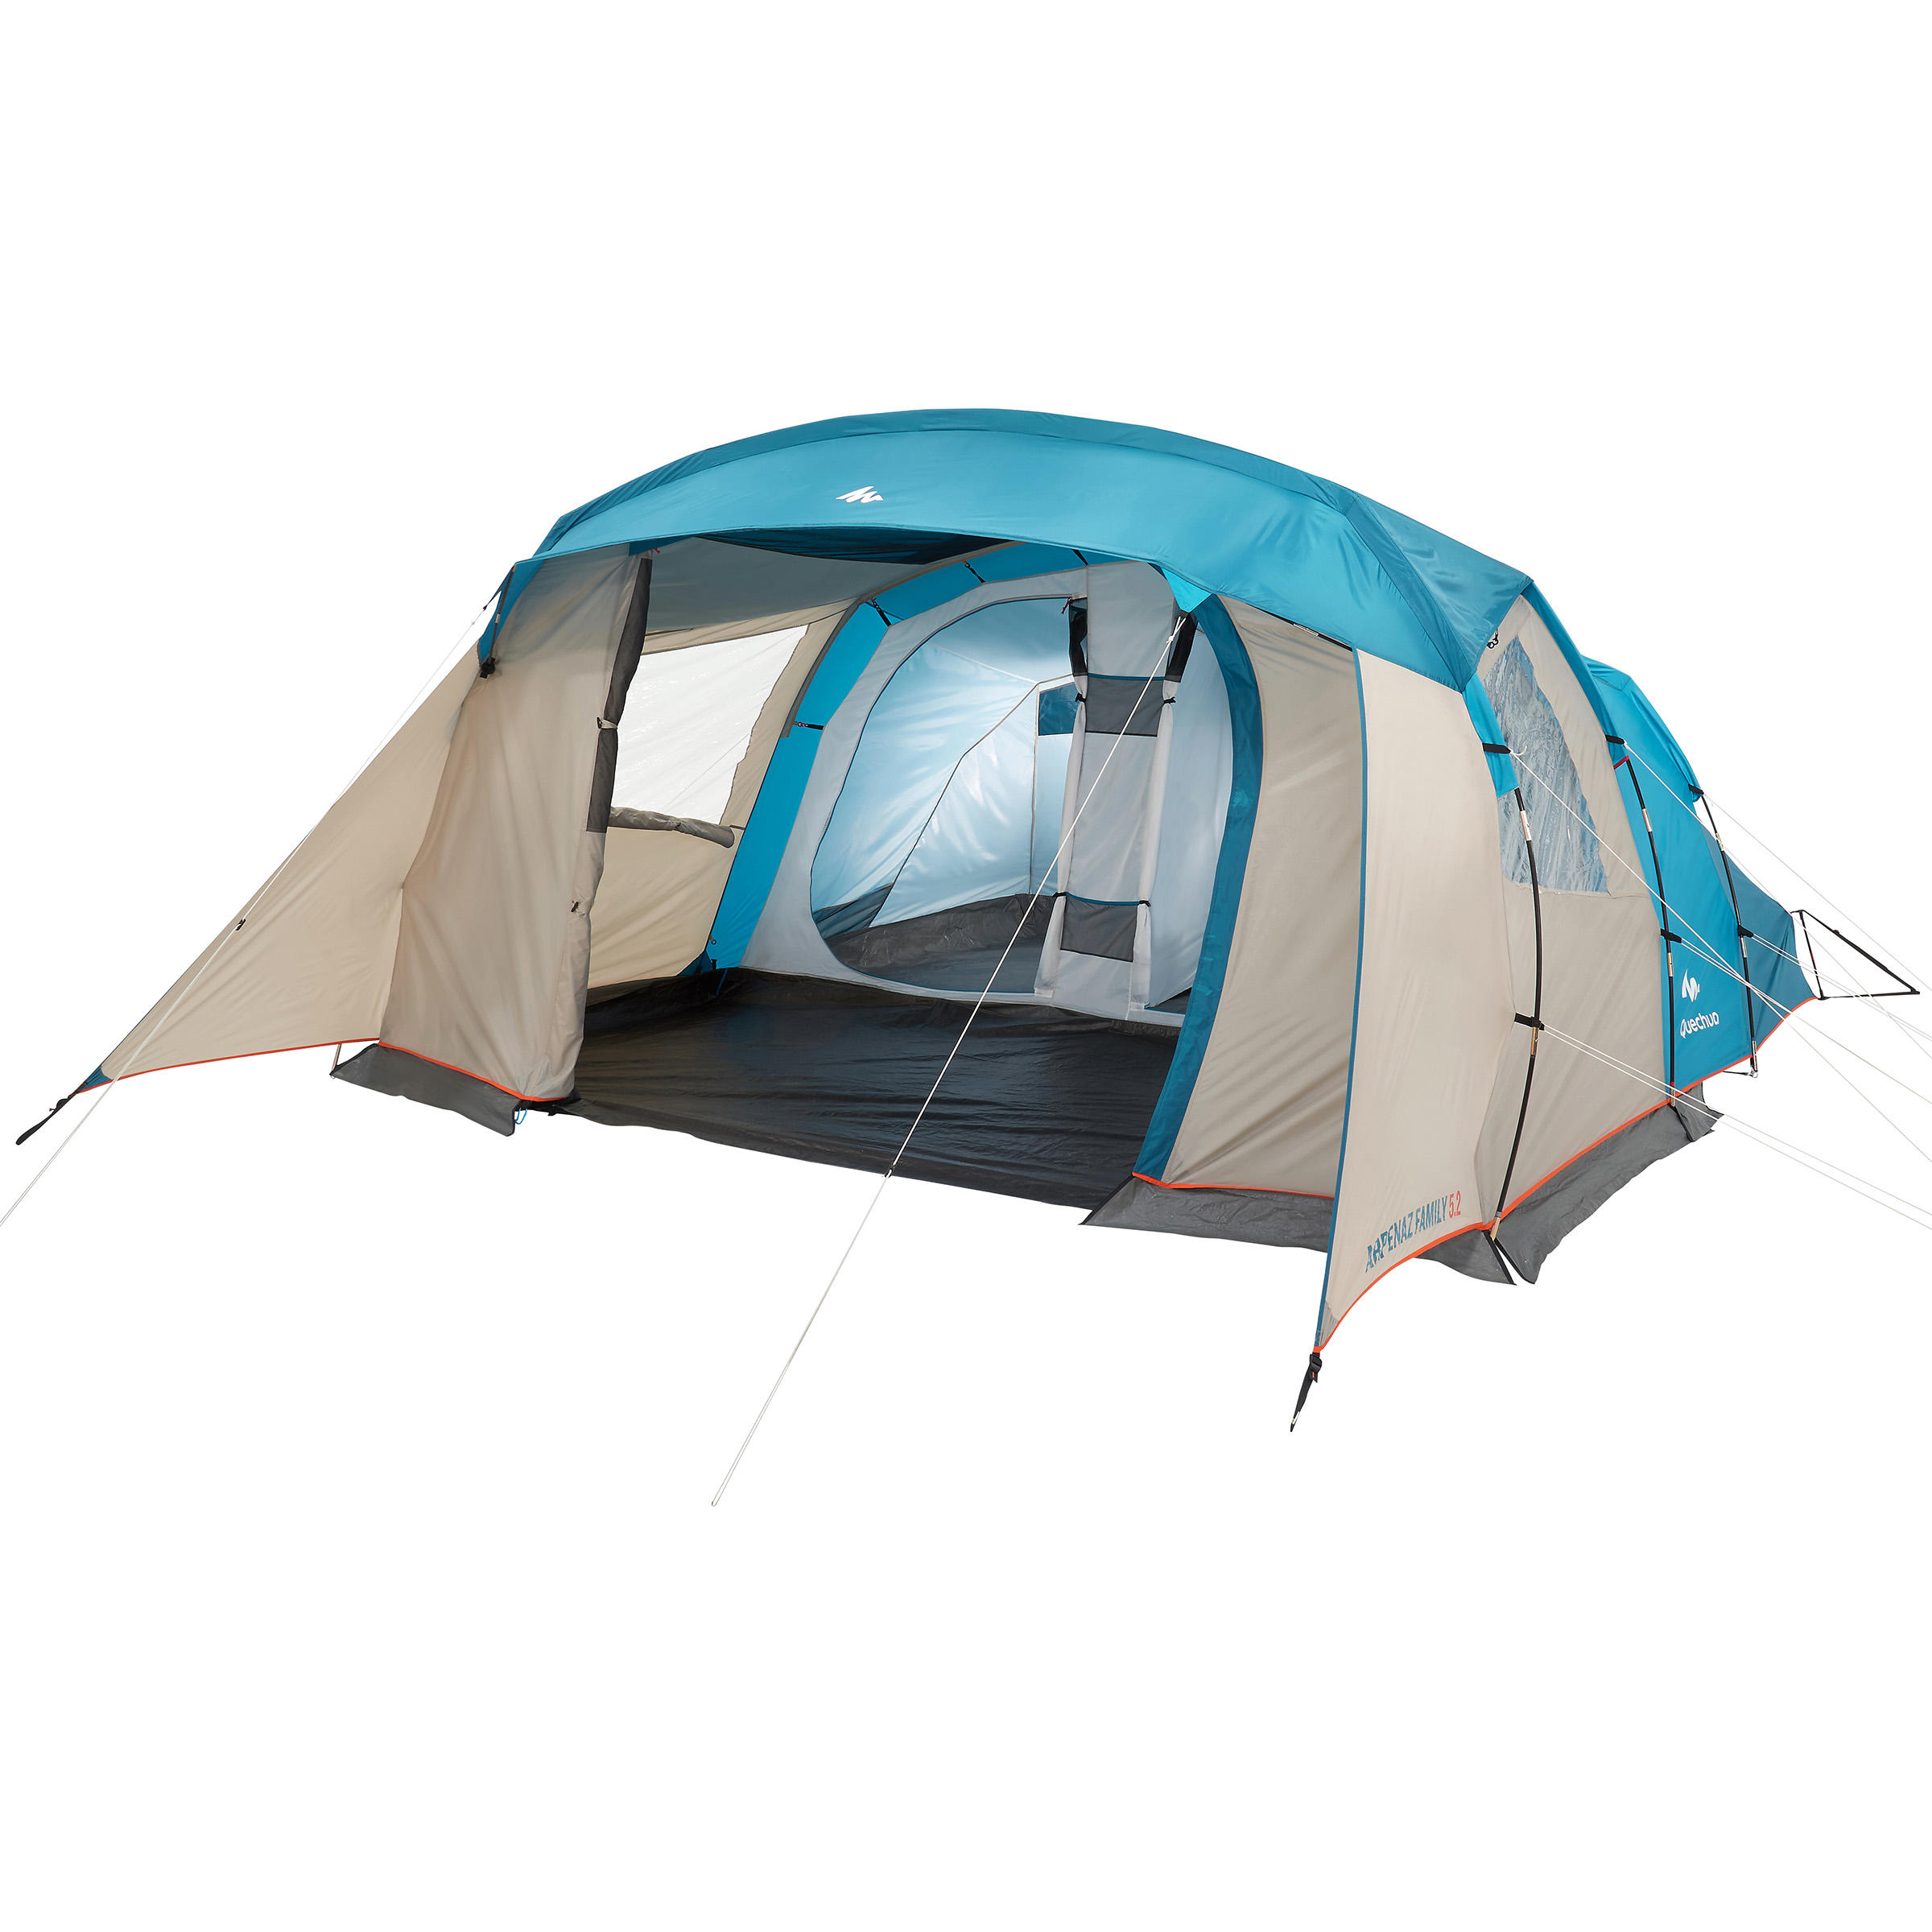 Arpenaz 5.2 Family camping tent _PIPE_ 